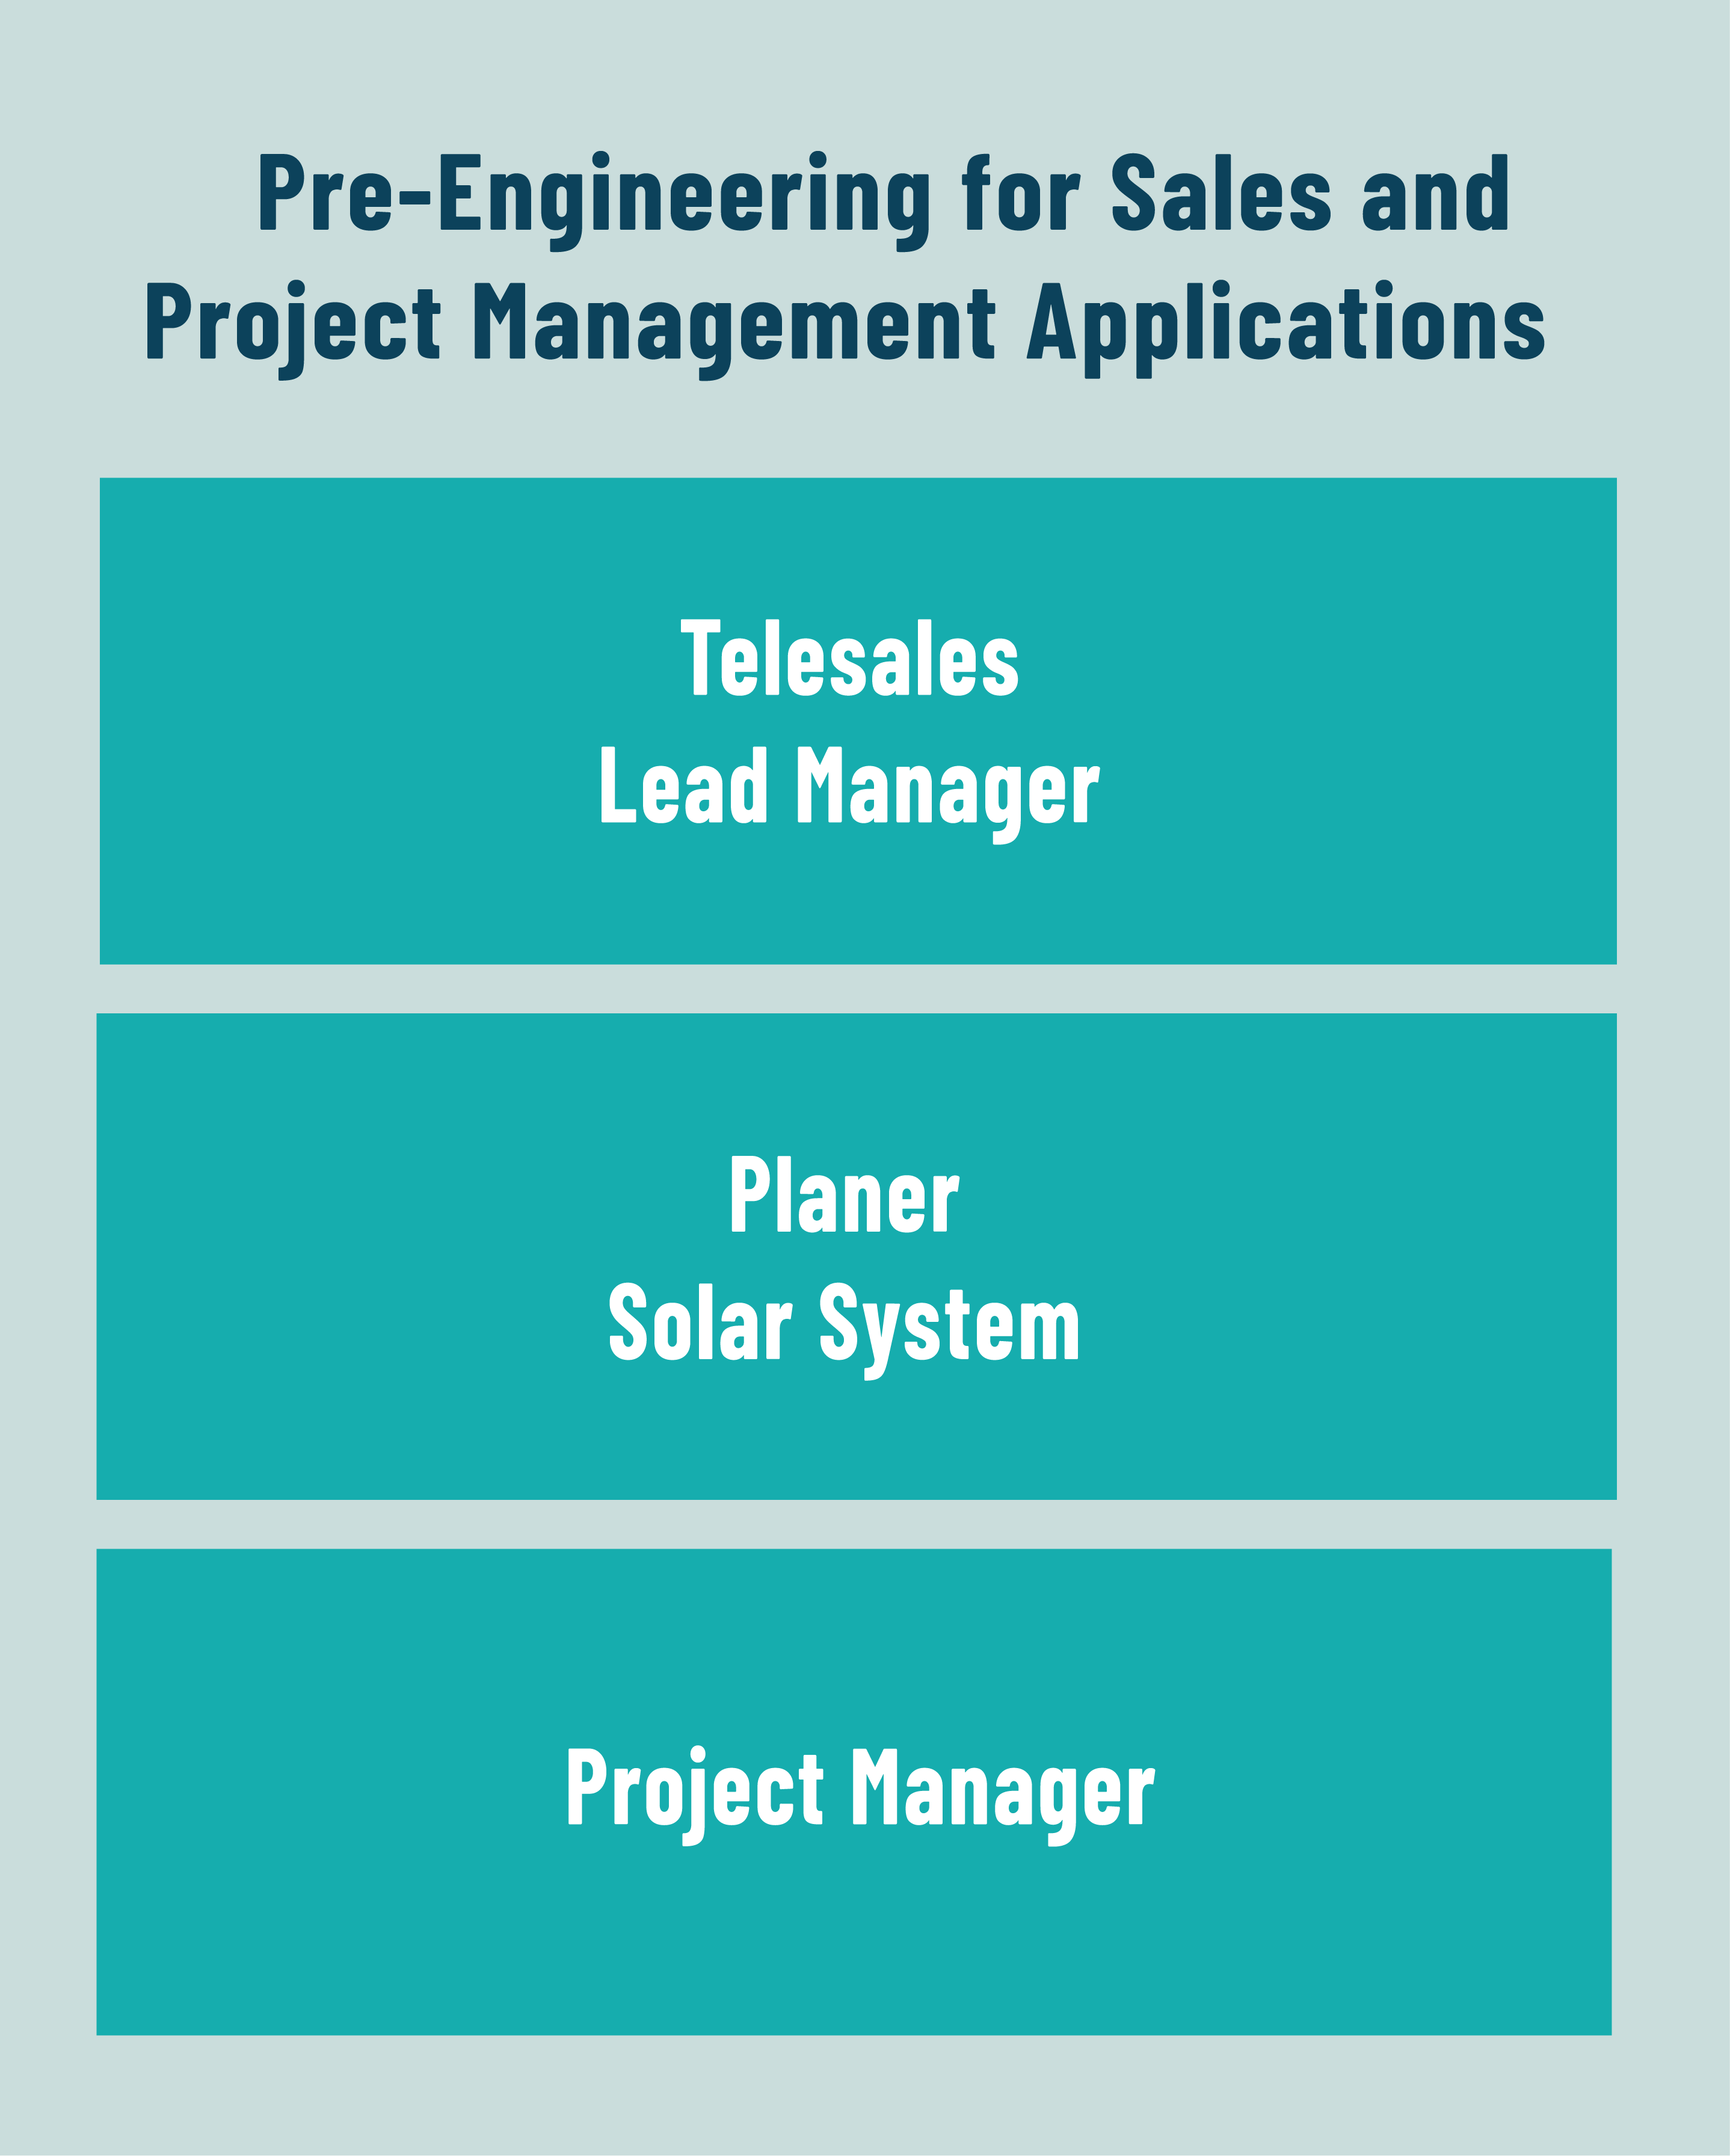 Pre-Engineering Applications for Sales & Project Management